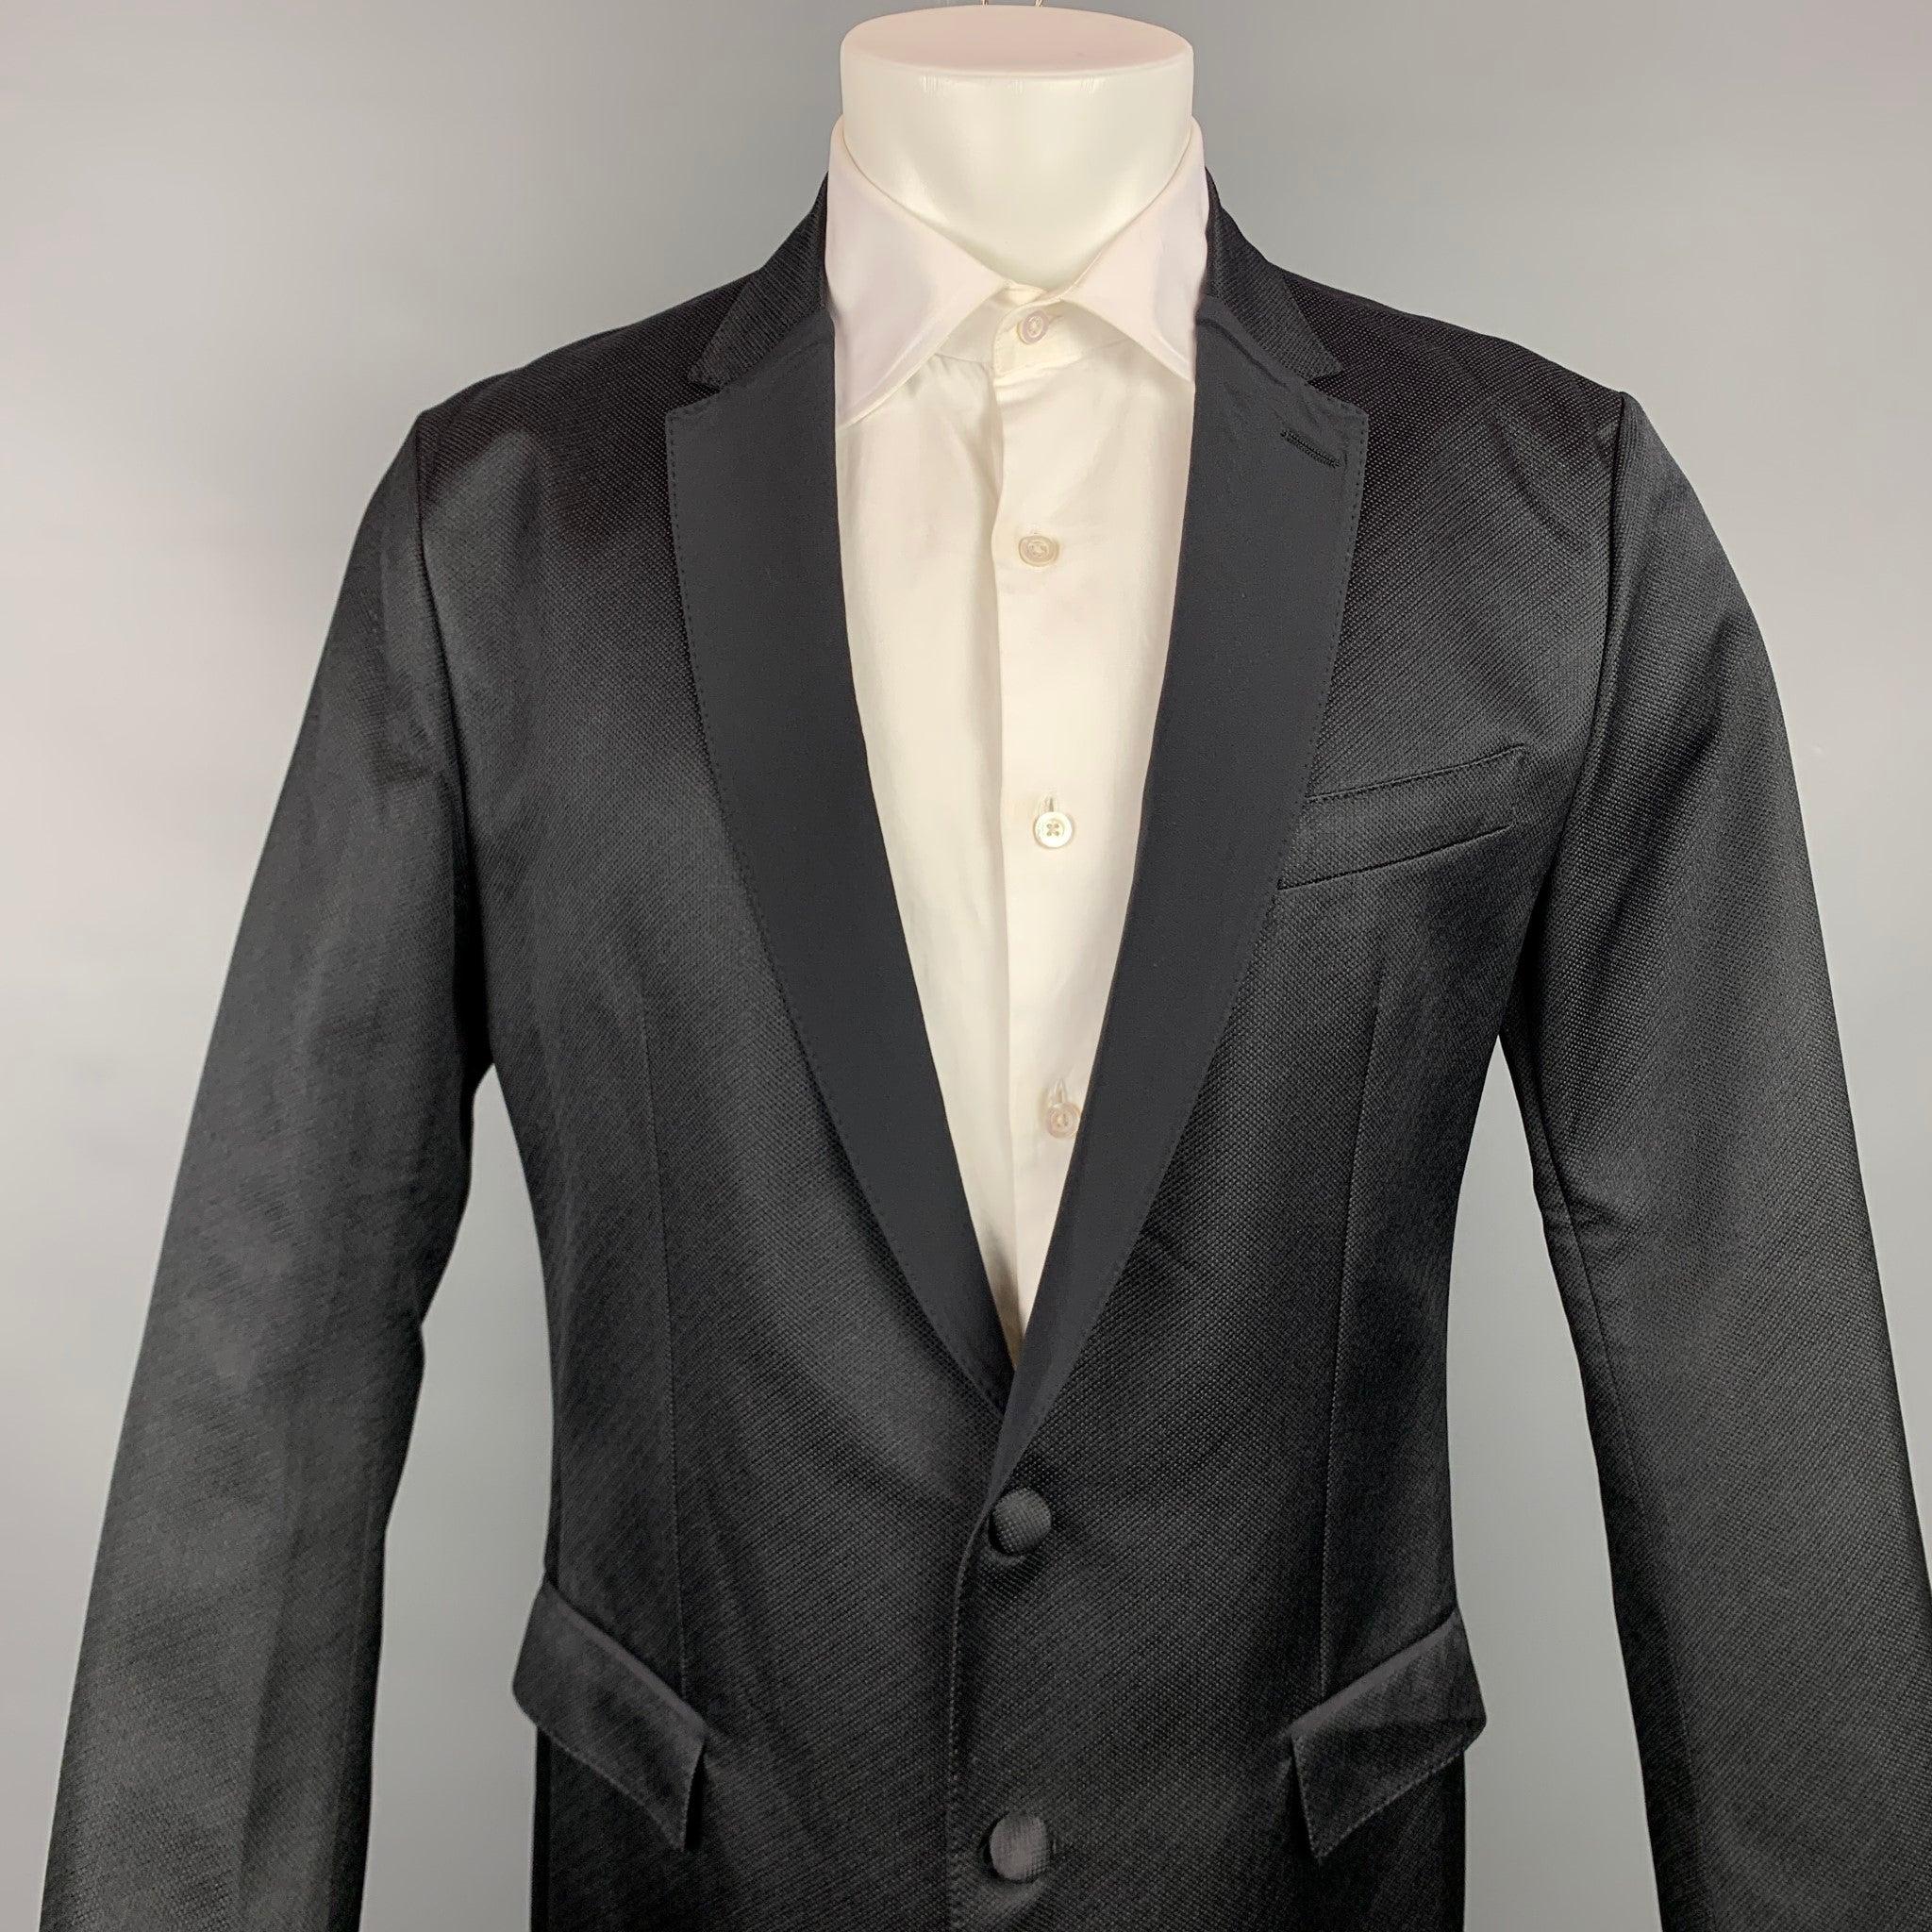 DOLCE & GABBANA sport coat comes in a black silk blend with no liner featuring a notch lapel, flap pockets, and a double button closure. Made in Italy.Very Good
Pre-Owned Condition. 

Marked:   IT 52 

Measurements: 
 
Shoulder: 18 inches  Chest: 42